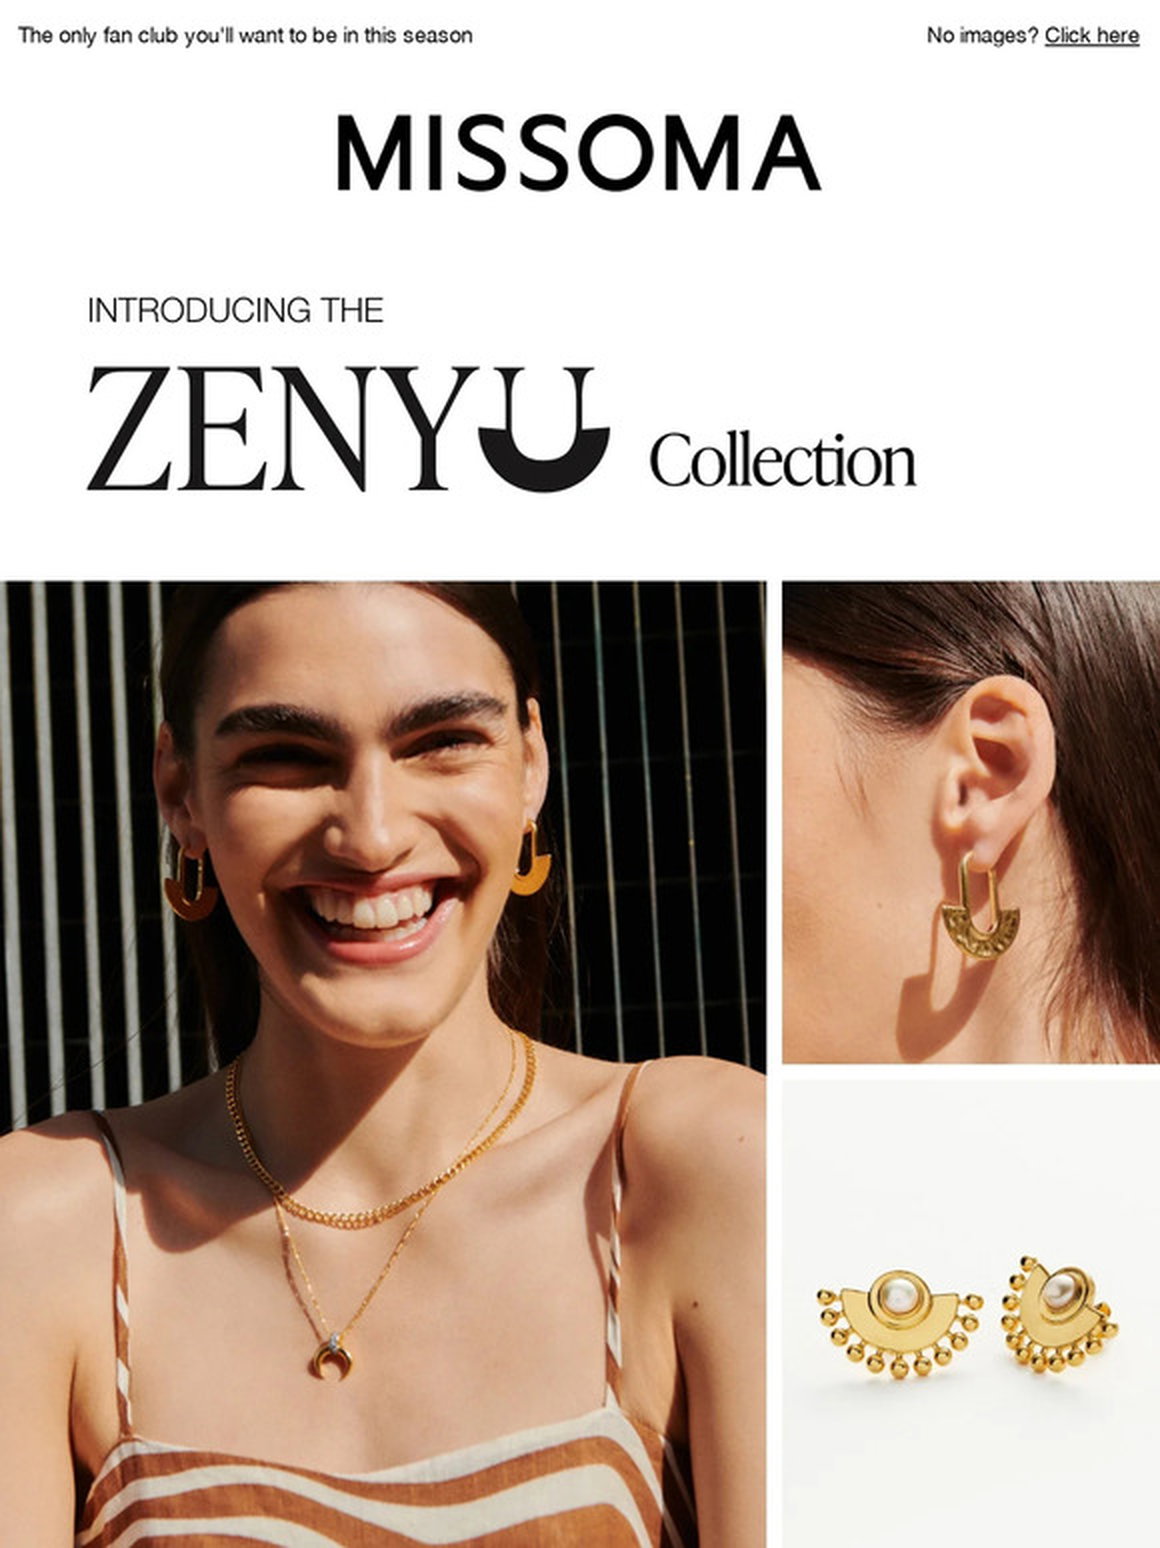 missoma: Introducing the Zenyu collection | Milled